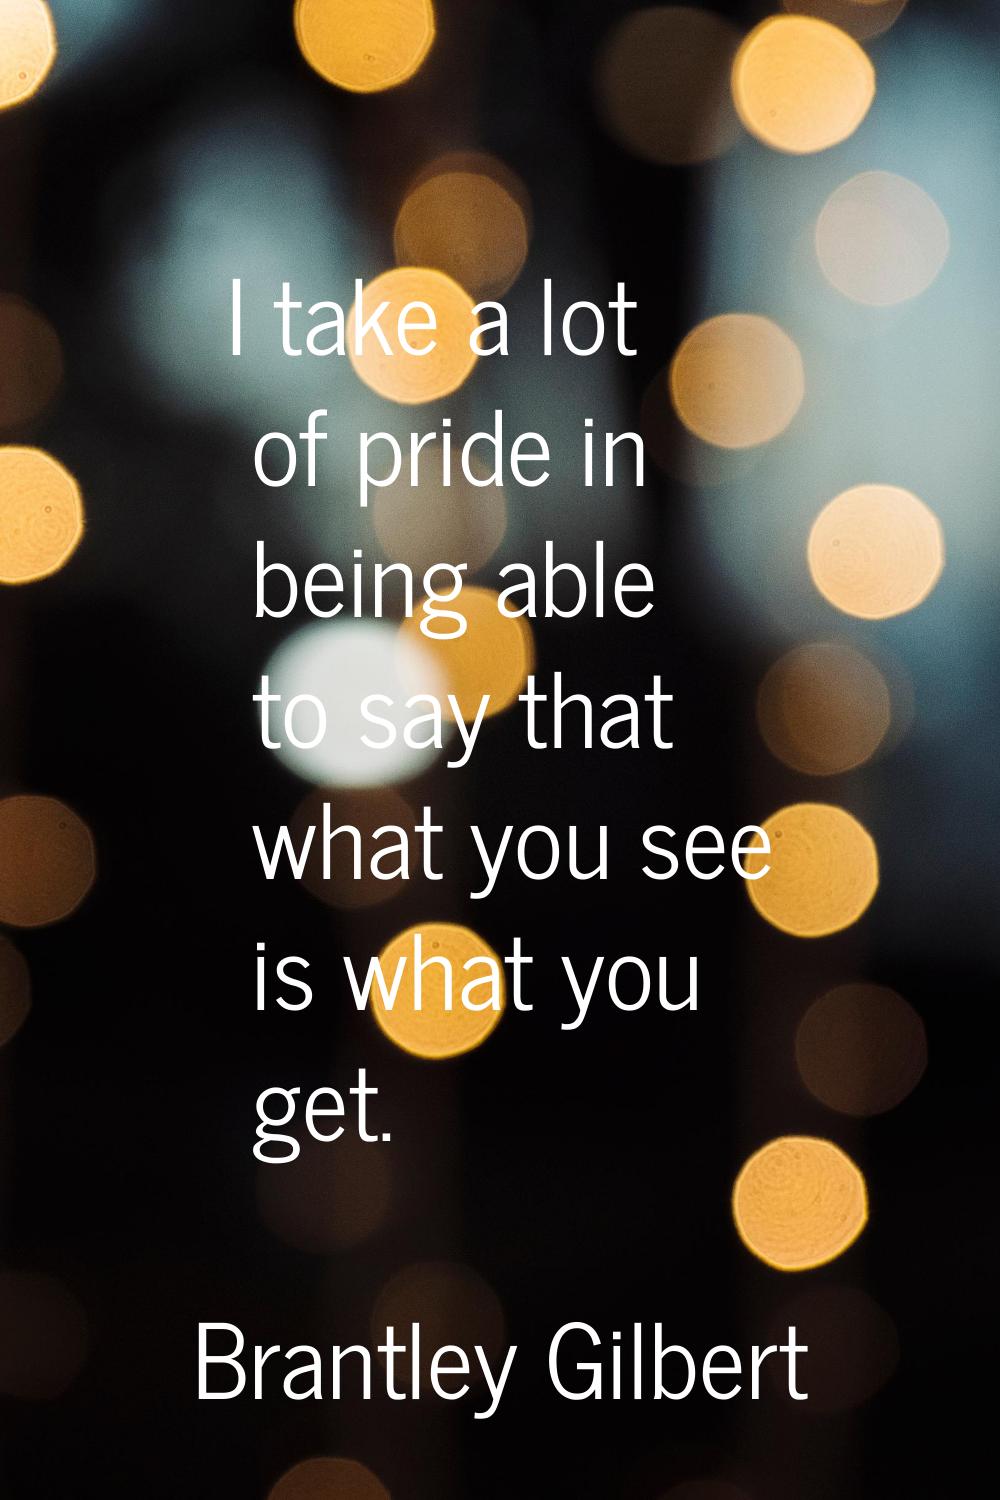 I take a lot of pride in being able to say that what you see is what you get.